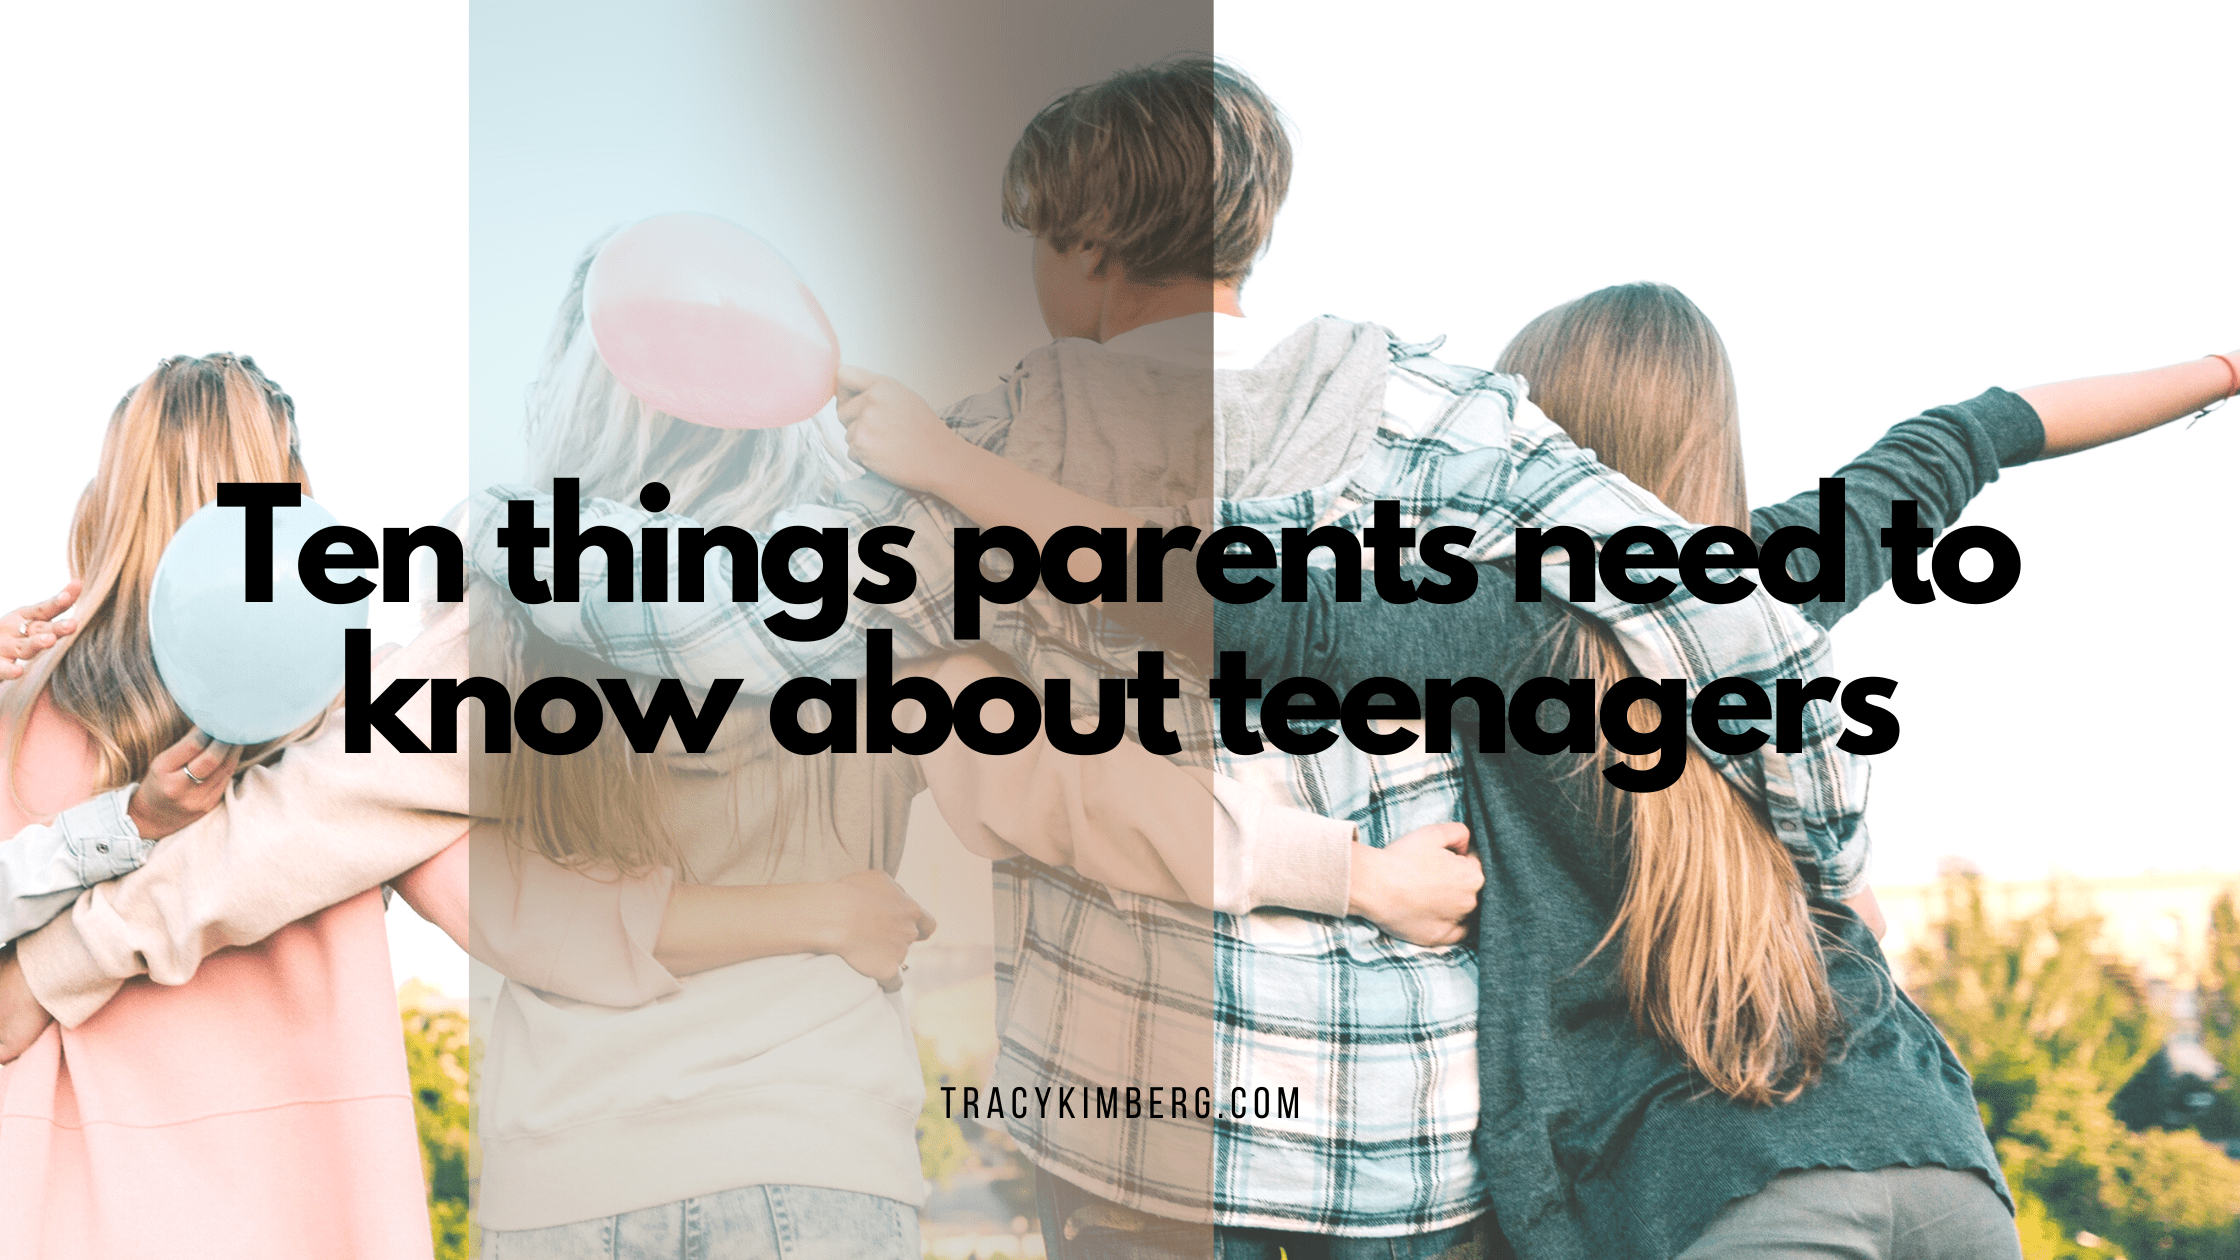 Ten things parents need to know about teenagers